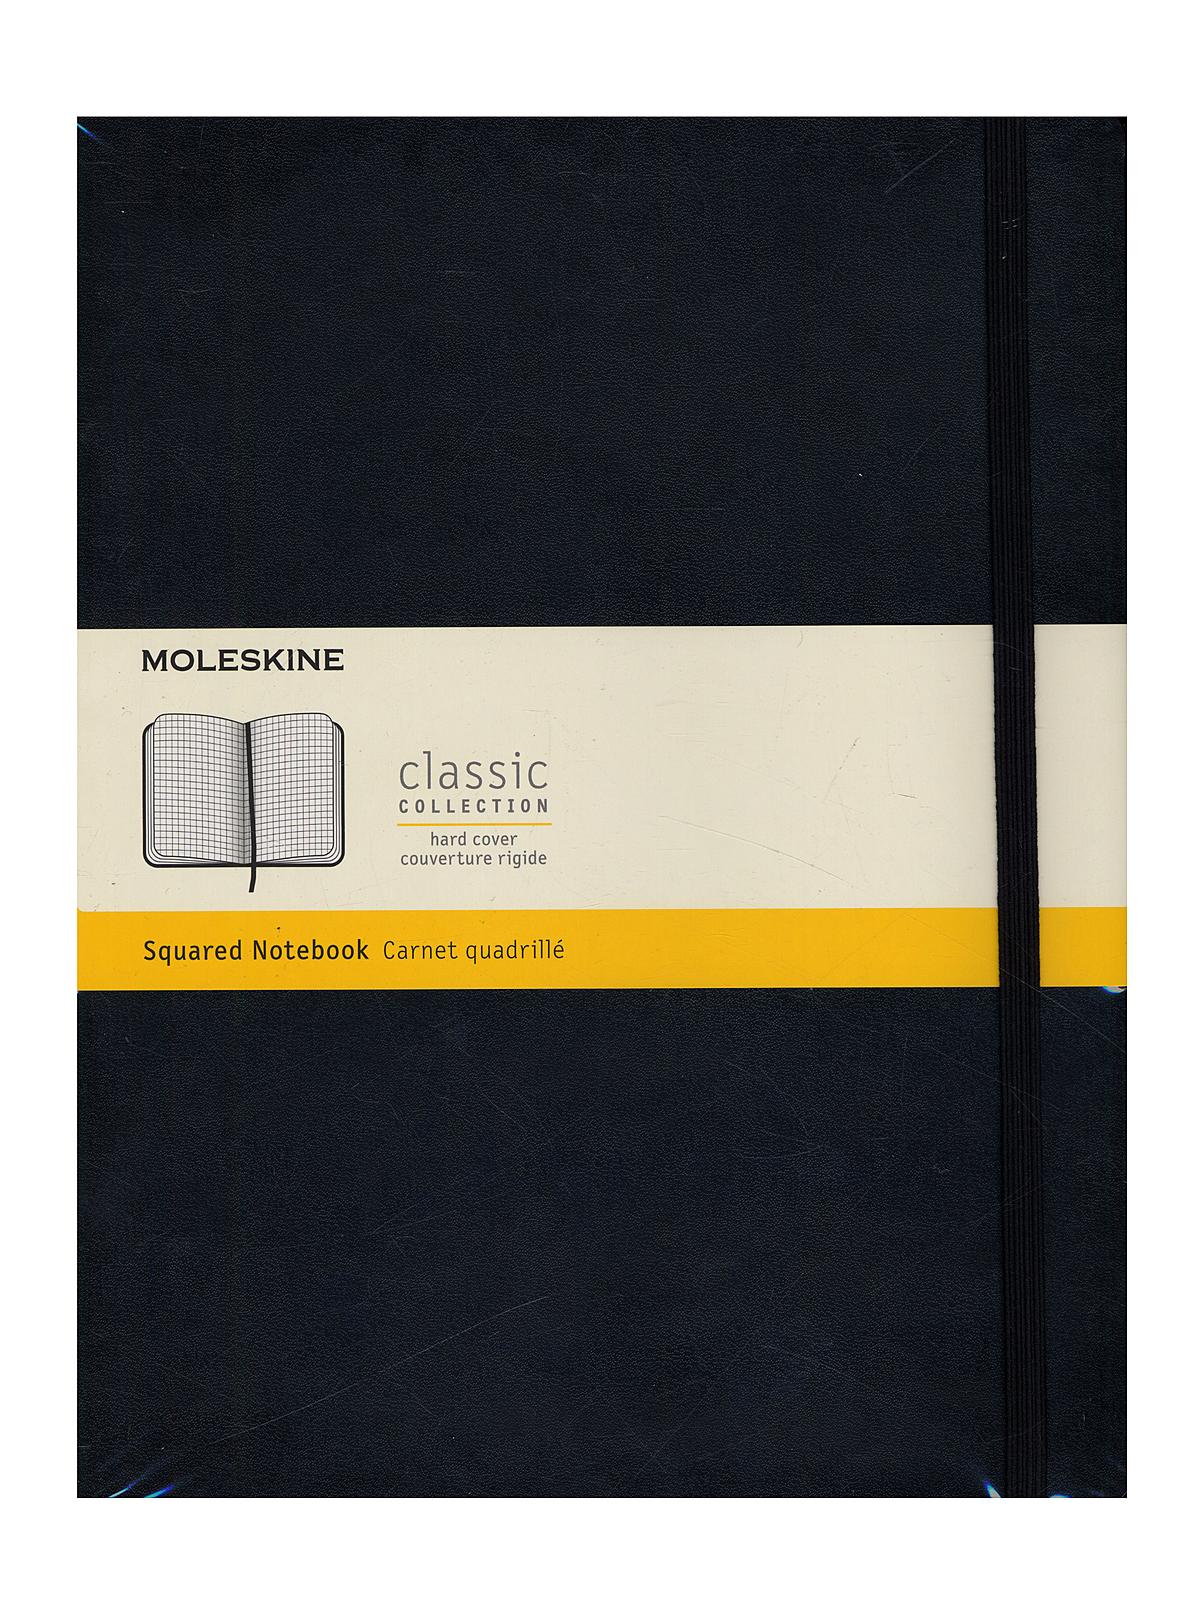 Classic Hard Cover Notebooks Black 7 1 2 In. X 9 3 4 In. 192 Pages, Squared